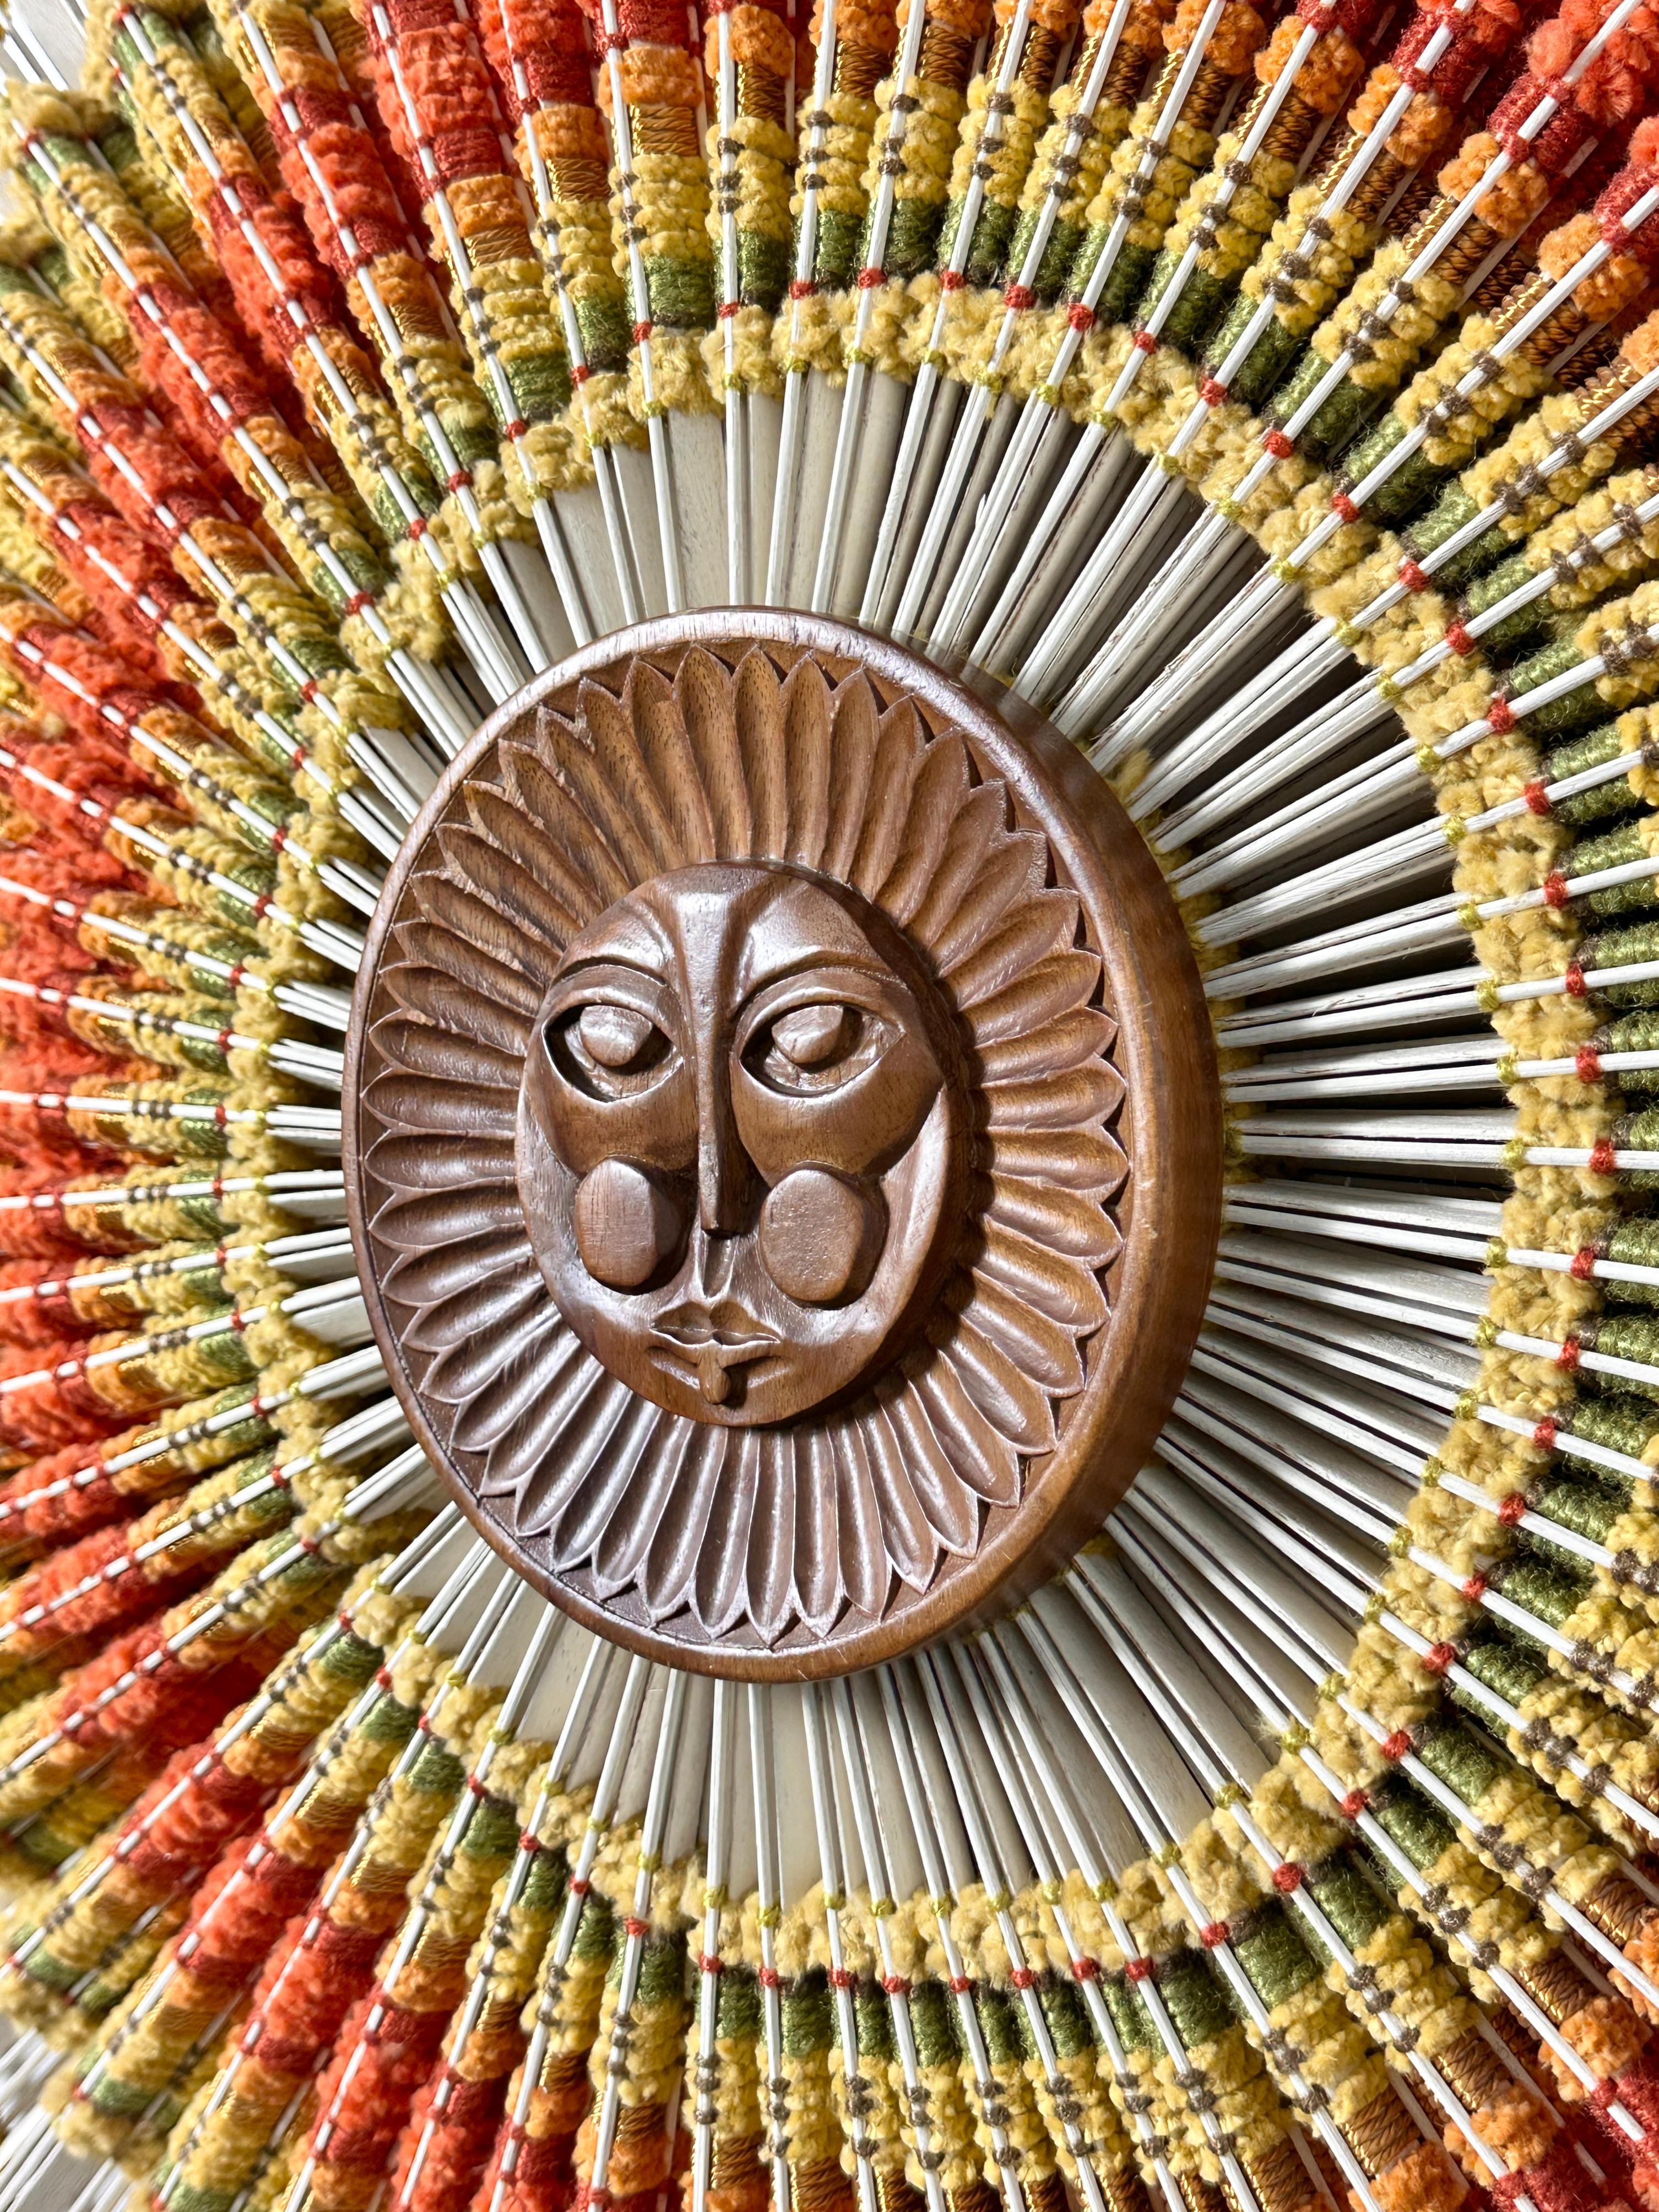 Fabric Vintage Maria Kipp Woven Textile Sun Face Wall Hanging Sculpture 1960s For Sale